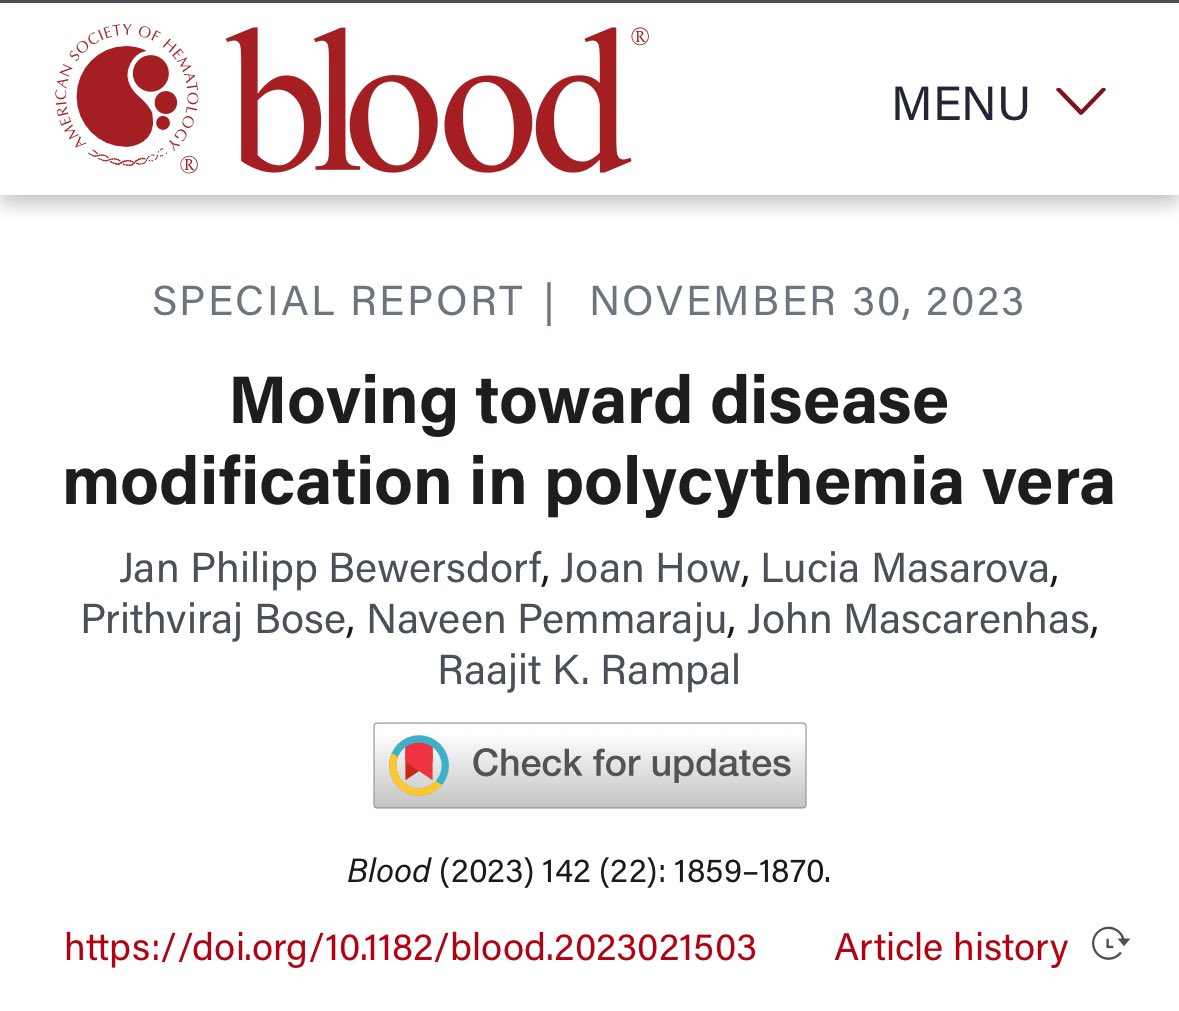 👉👉👉It’s time to start re-thinking & re-imagining & really discussing a new era of endpoints, response criteria & what it means to achieve #DiseaseModification for patients with #PolycythemiaVera in modern targeted therapy era 📣 #MPNSM 

ashpublications.org/blood/article/…